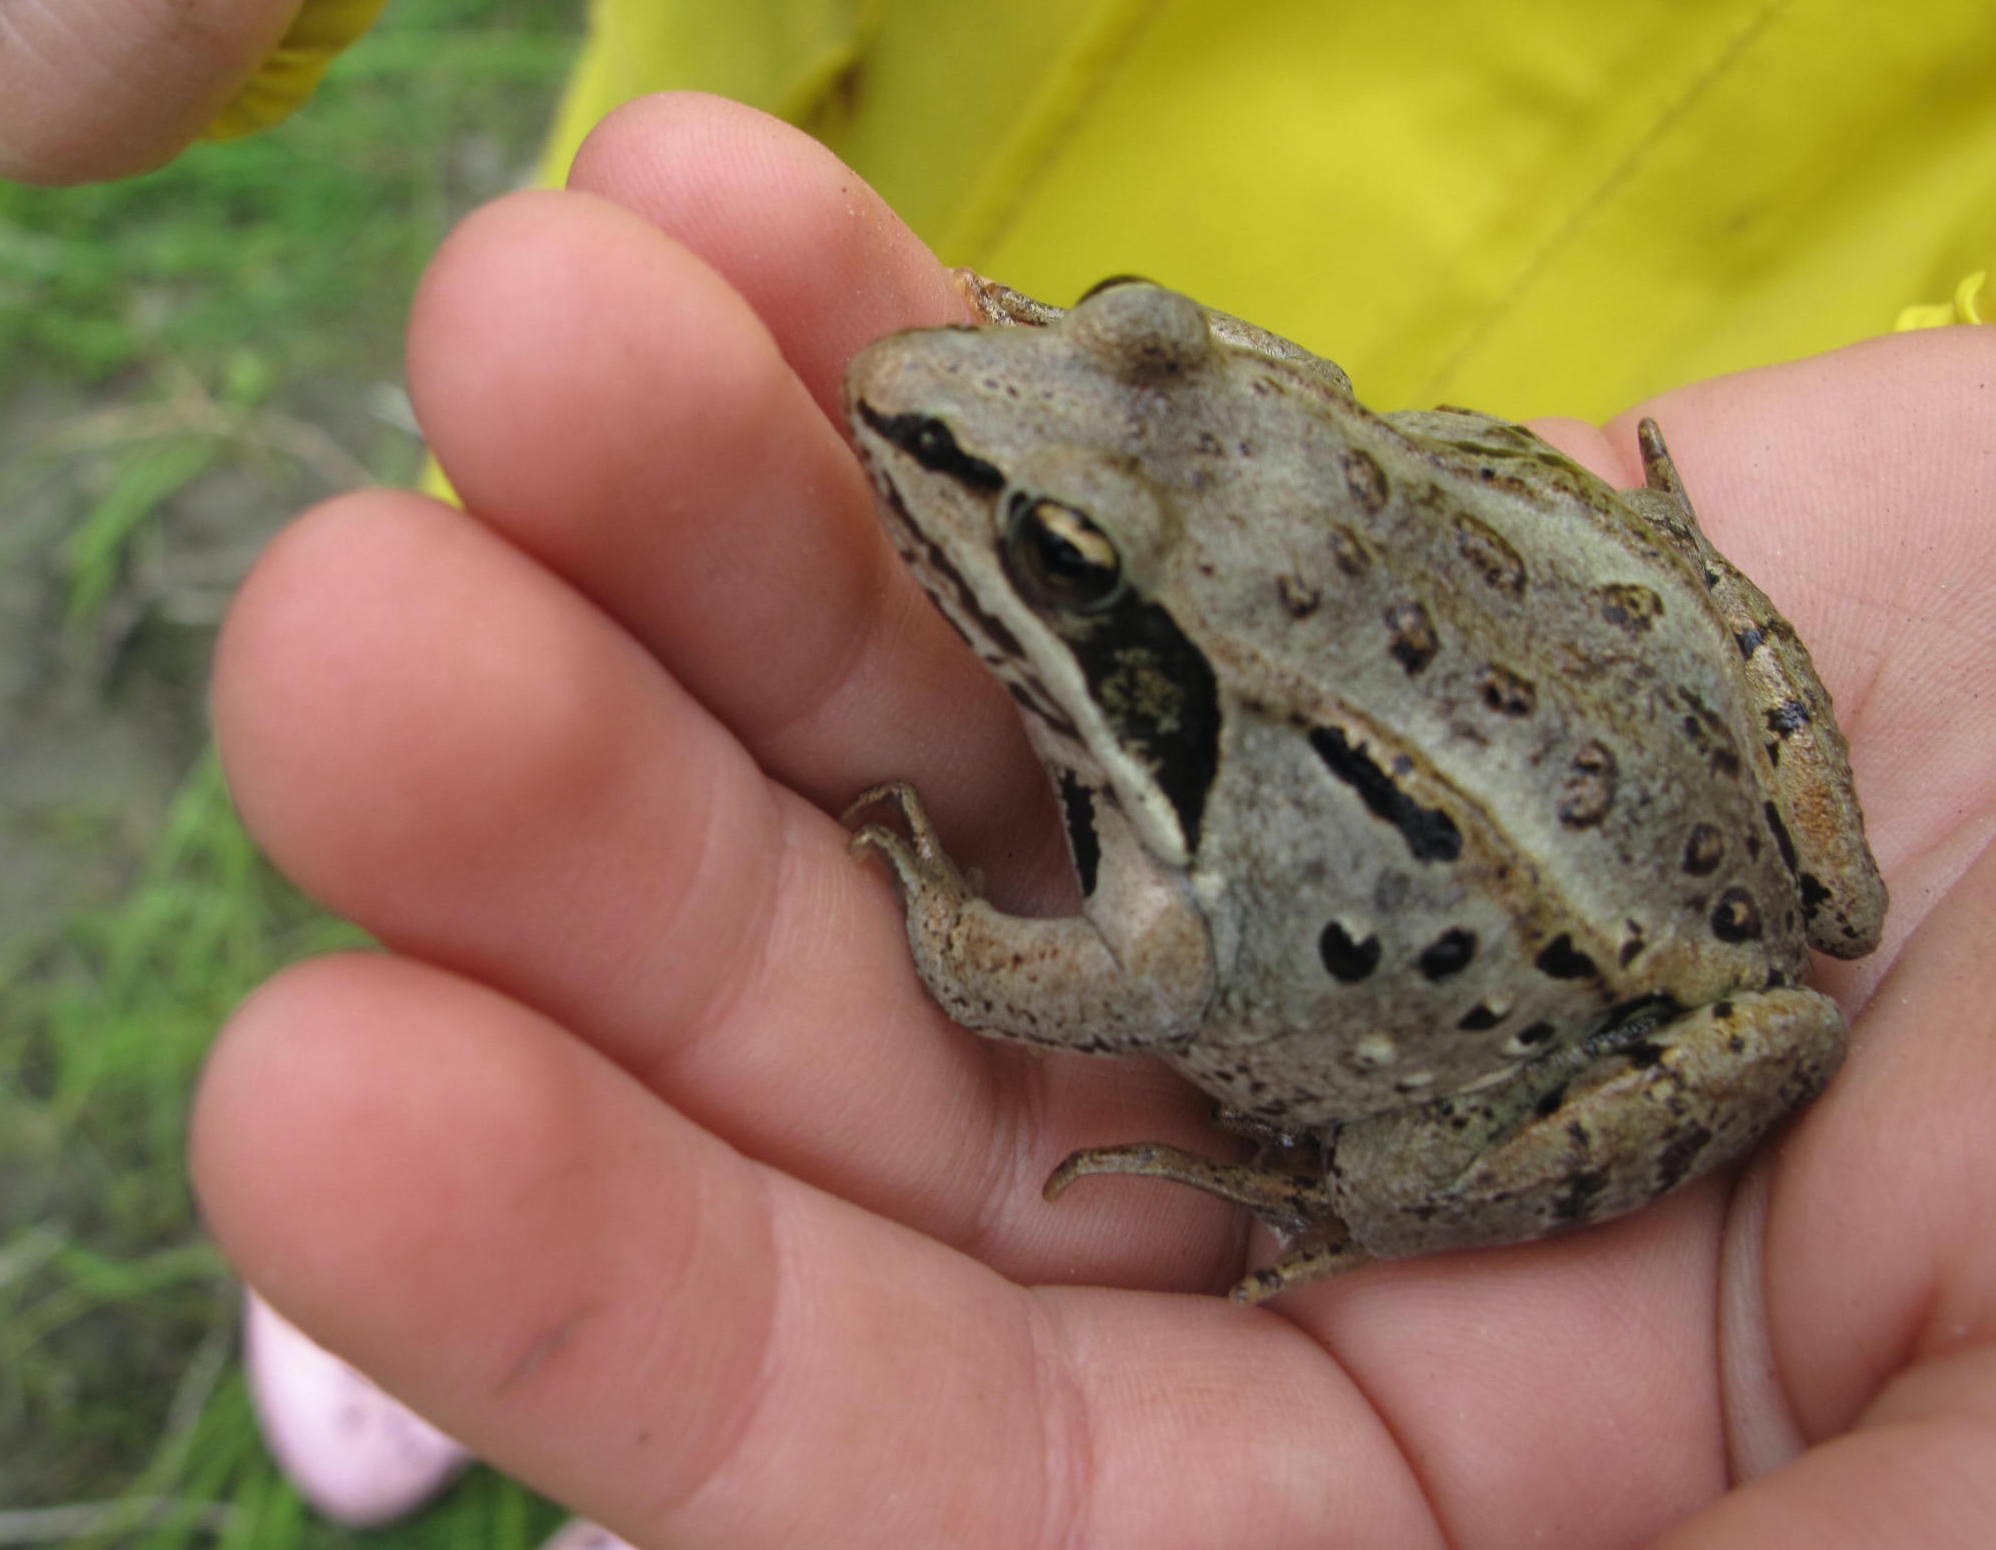 A frog sits in a child's hand.